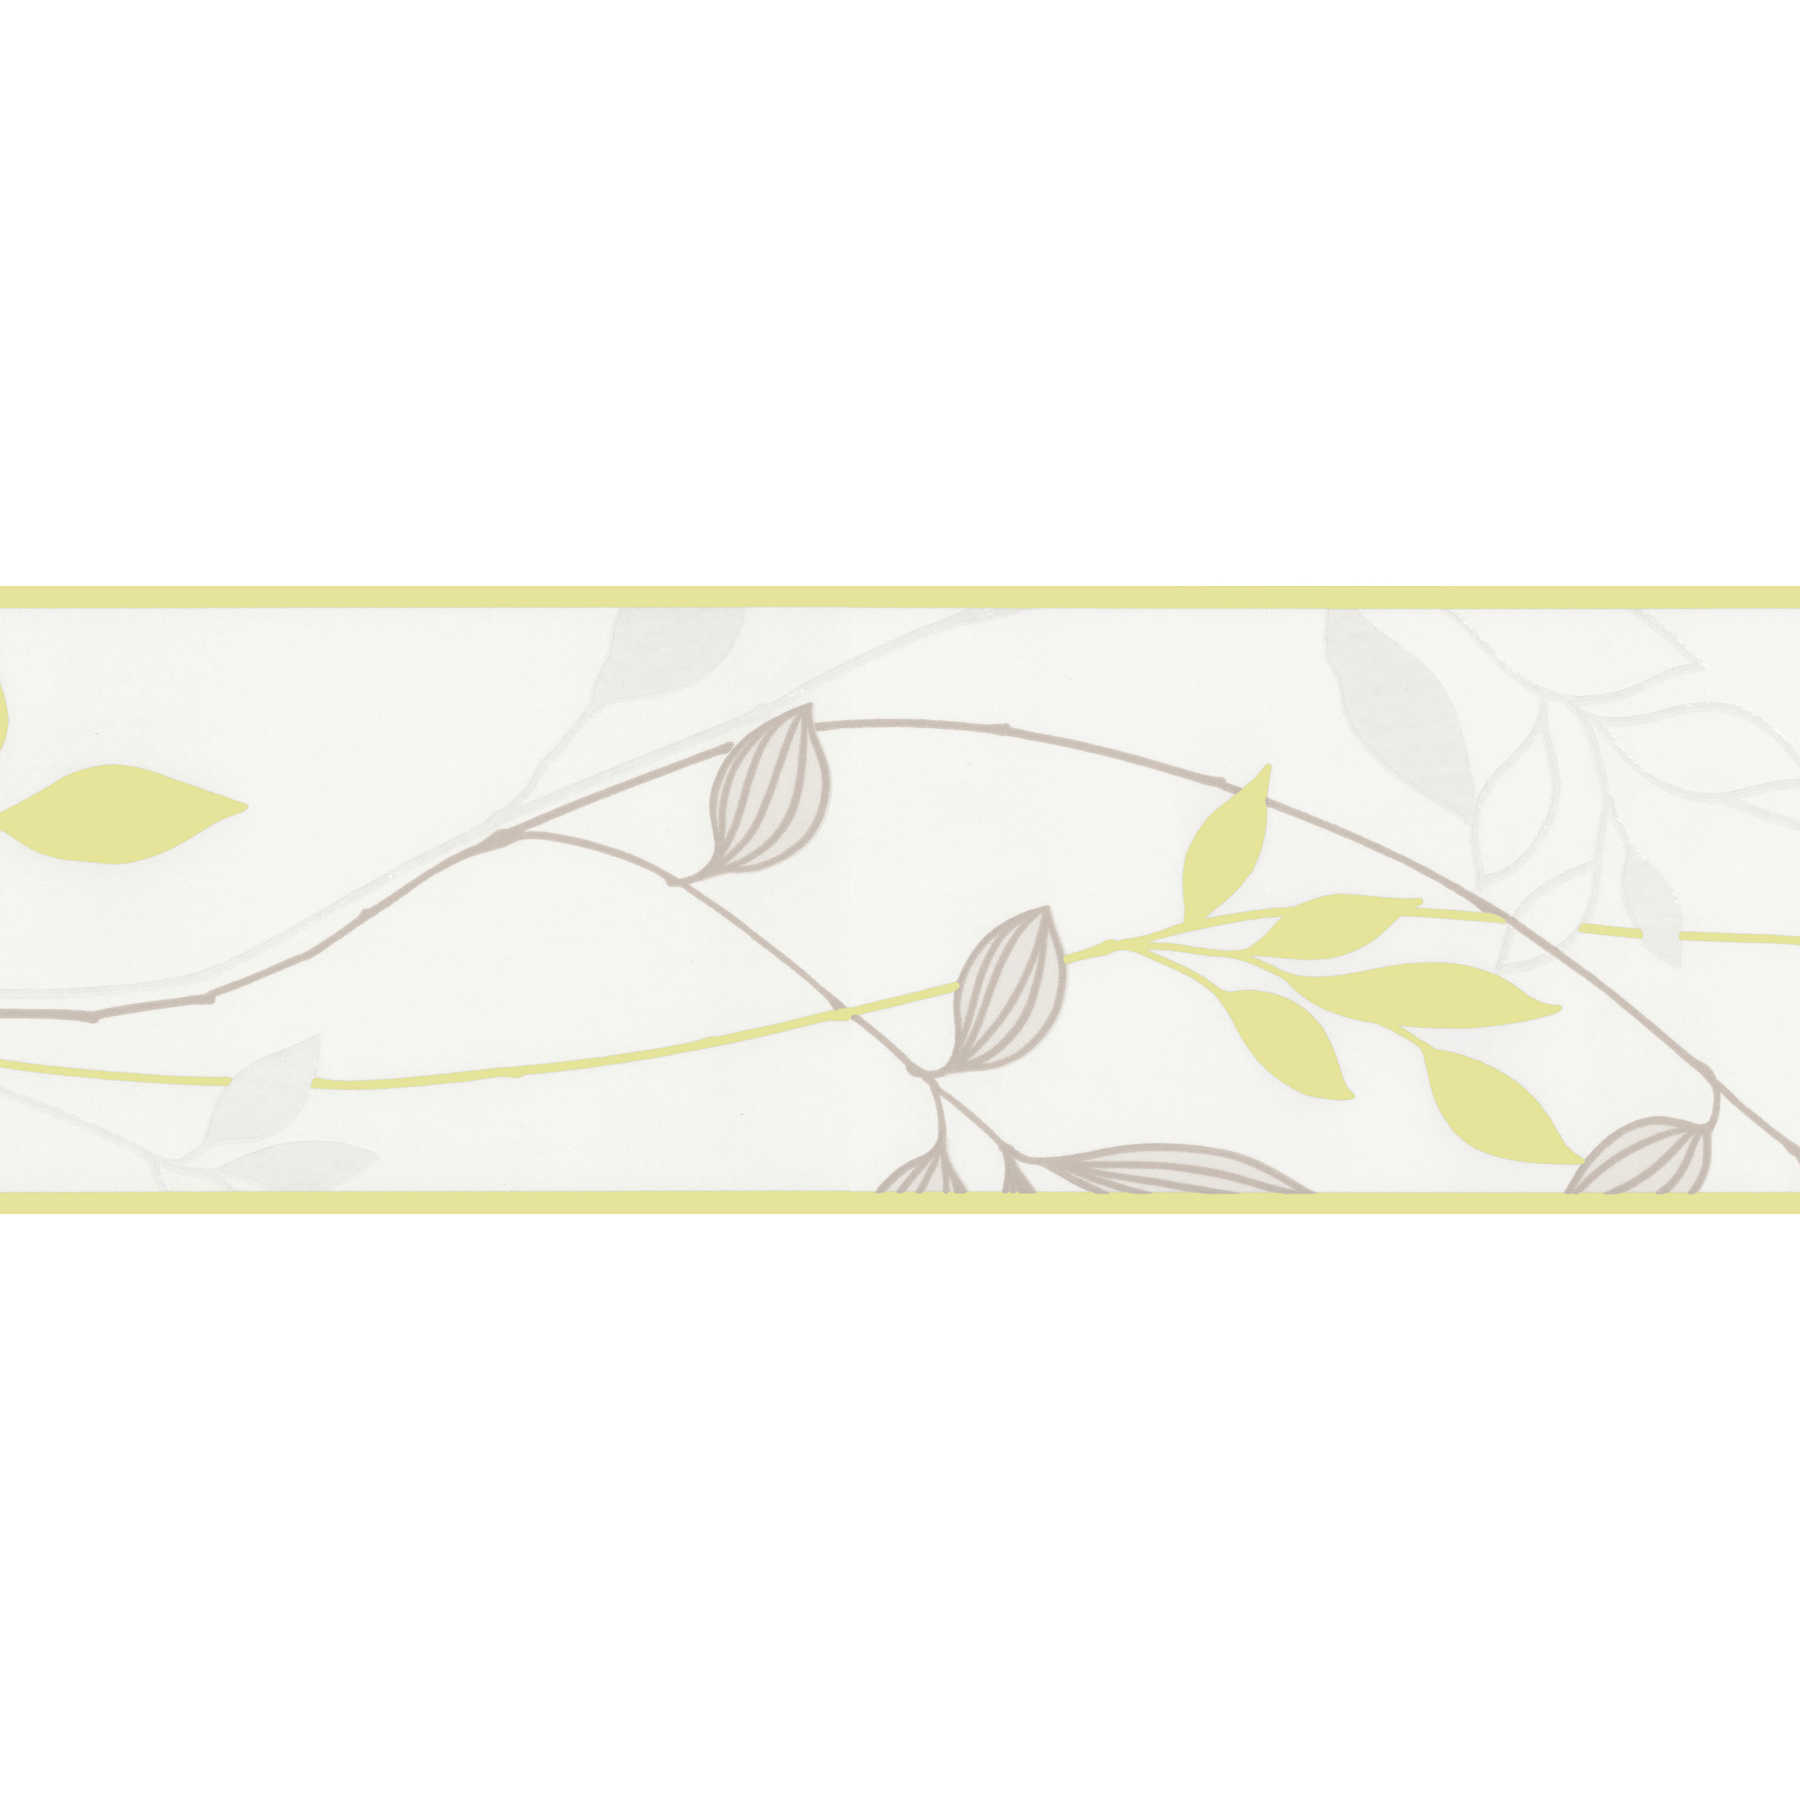         Leaves tendrils border with natural plant motif - green, grey, cream
    